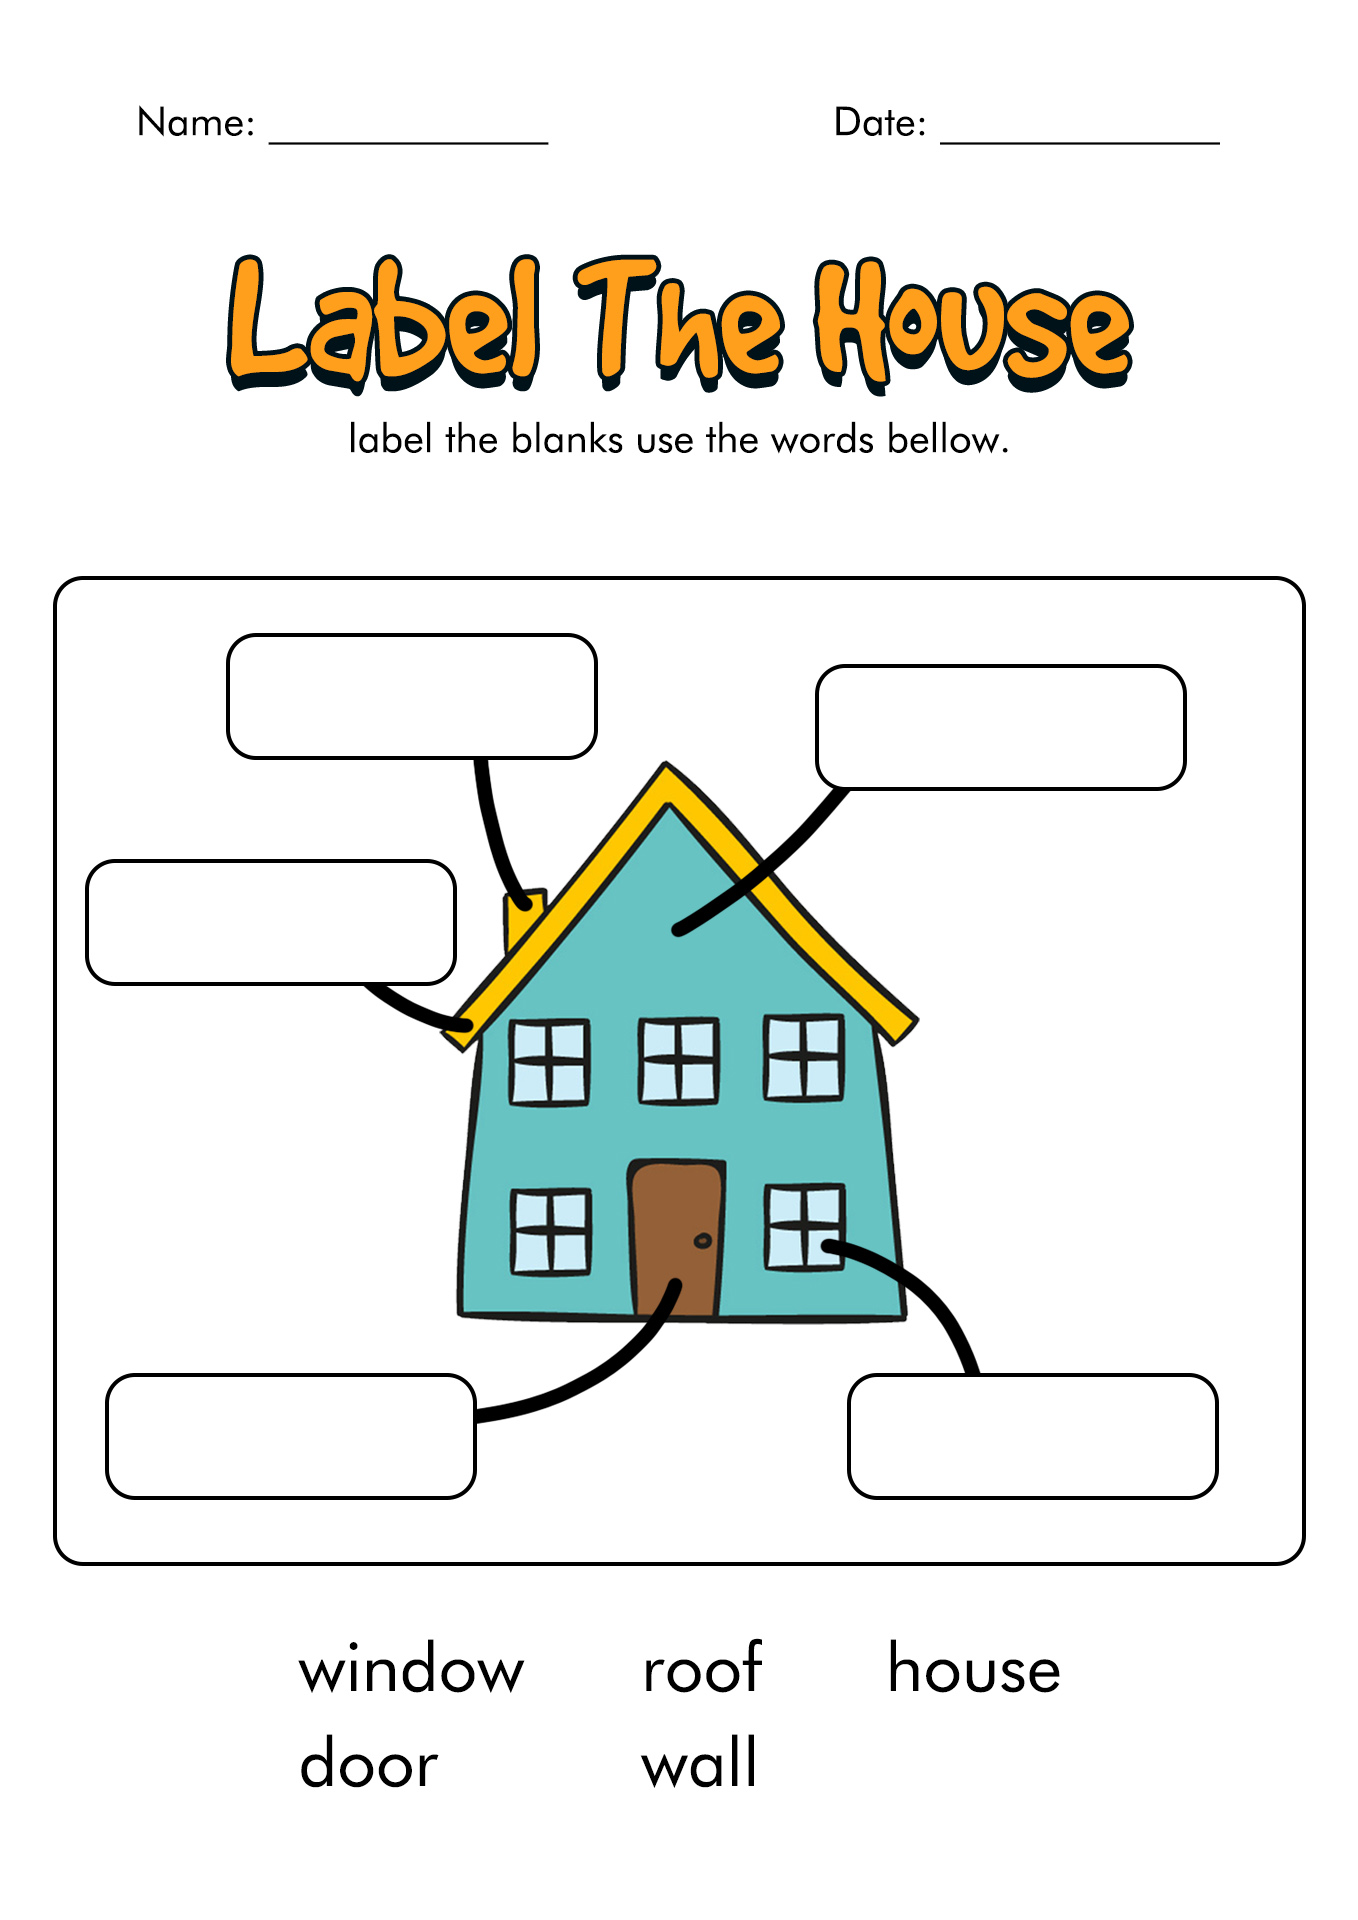 Worksheet Label Parts of a House Image